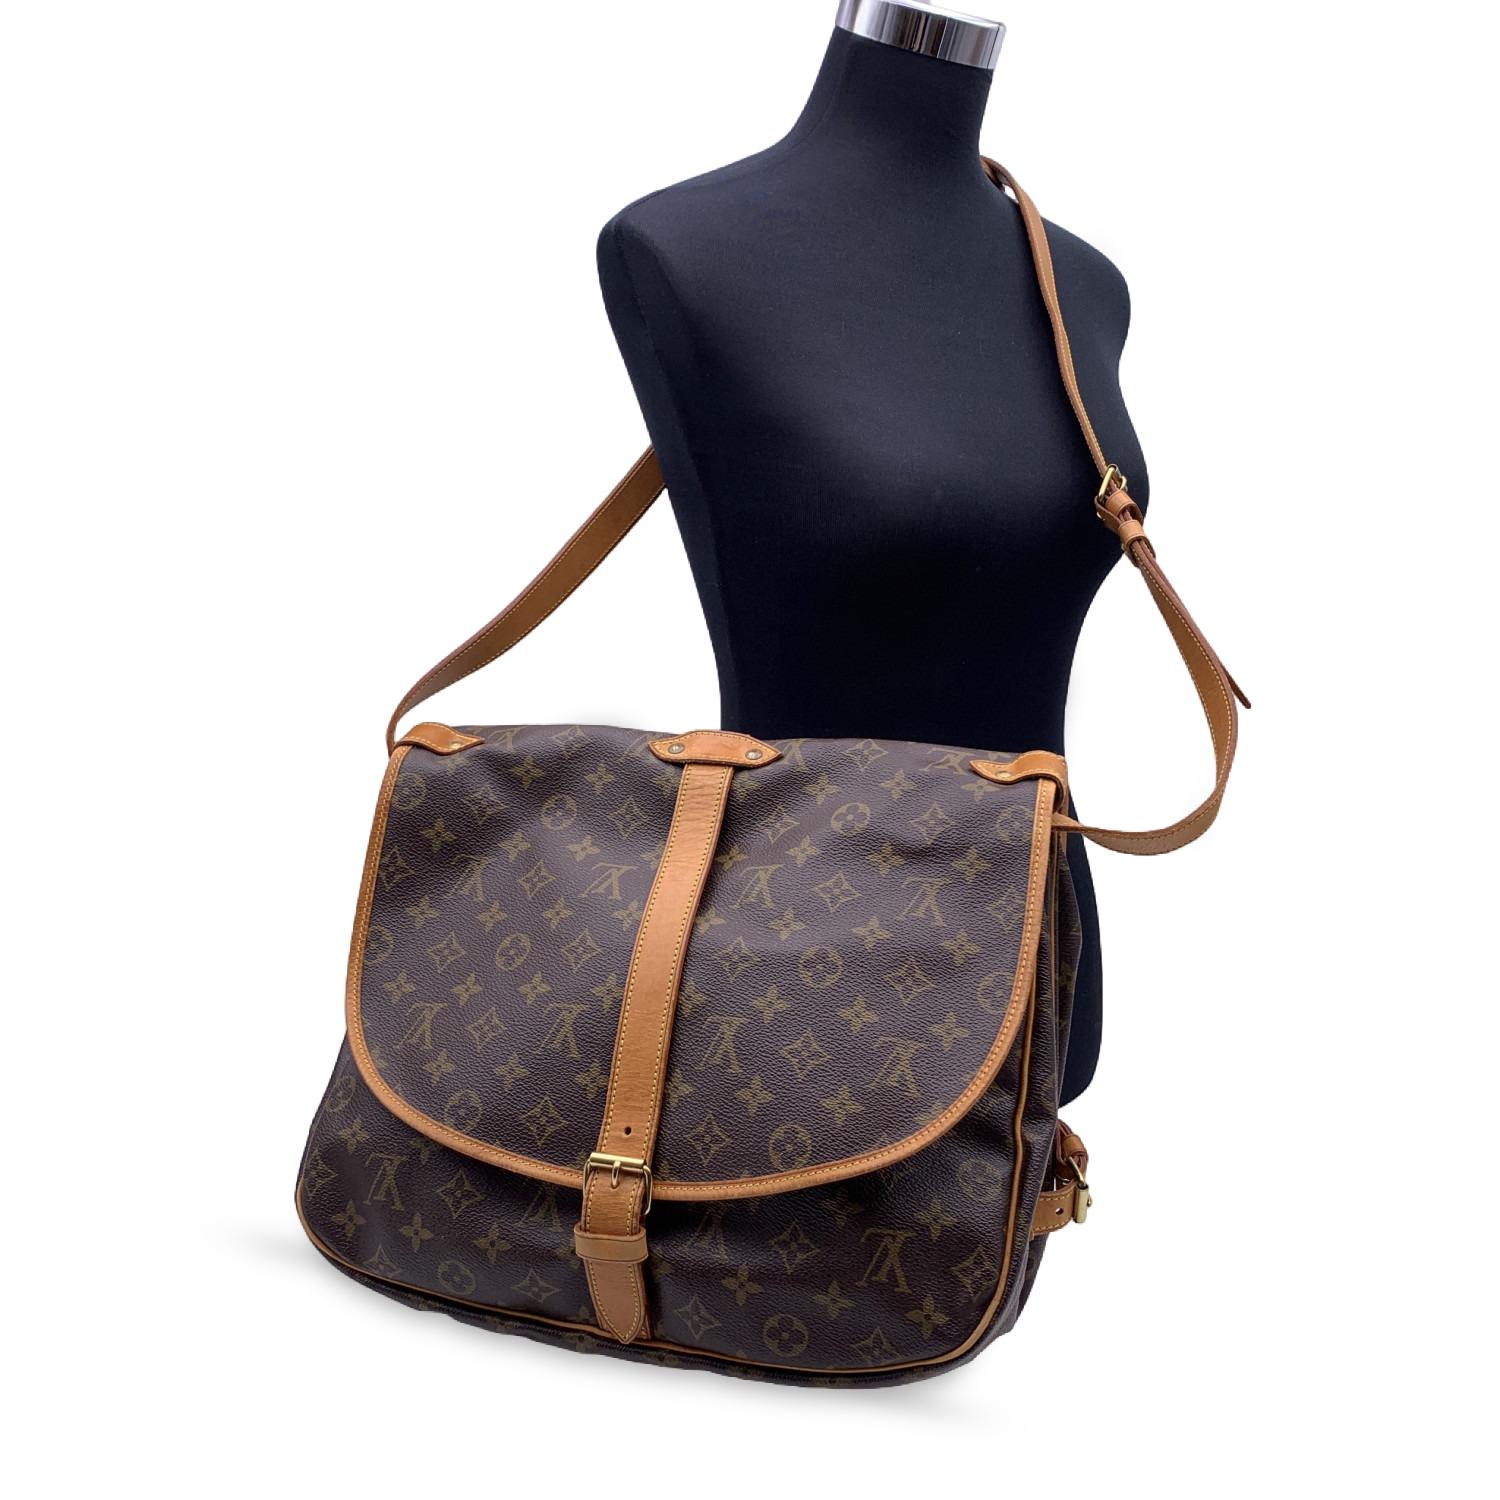 LOUIS VUITTON 'Saumur 35' inspired by equestrian 'SADDLE' bag. The legendary SAUMUR features dual front compartments, held tightly together at the sides with belt-like tabs. Adjustable long shoulder strap with pad for added comfort.

- Monogram